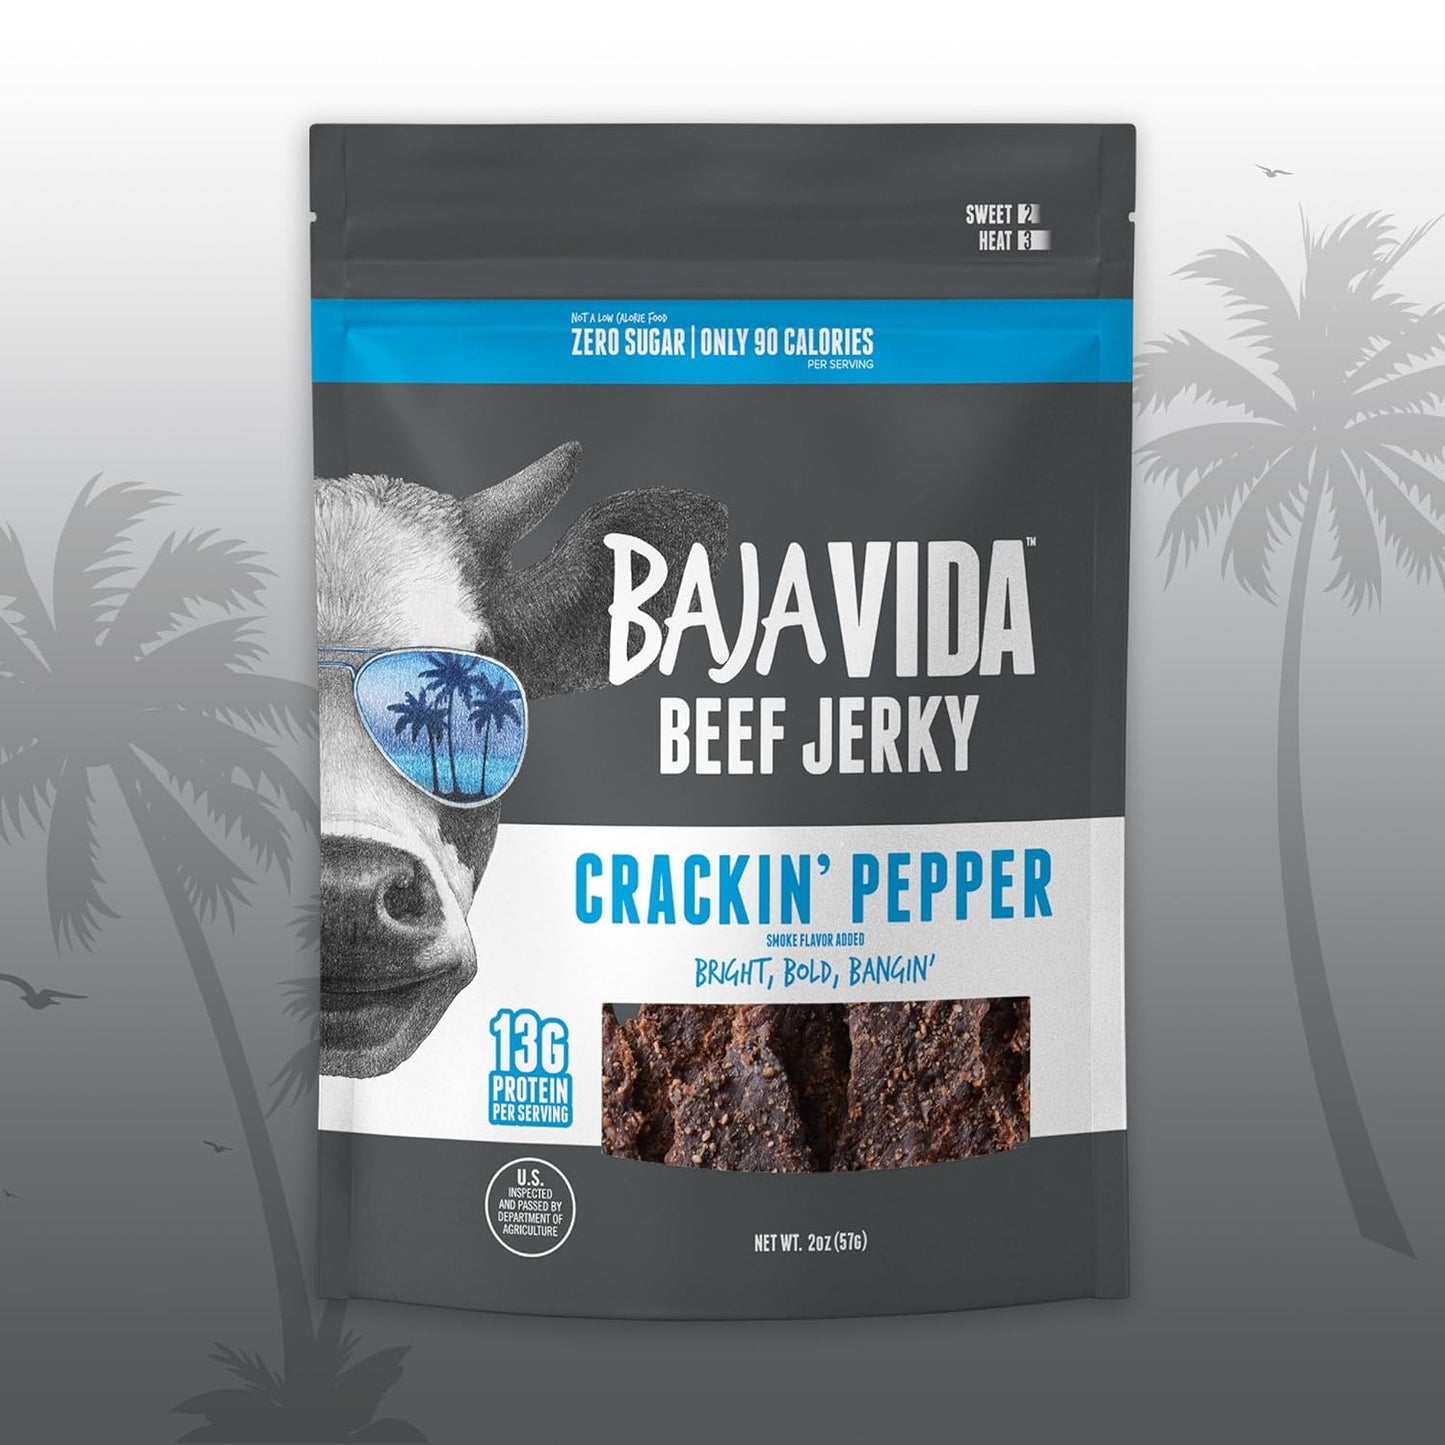 Jerky - 100% All Natural Beef Jerky, Keto Jerky, Gluten Free, Low Calorie Craft Jerky, 13G Protein per Serving, No Nitrates or Added Hormones - Crackin' Pepper, 2 Oz Bag (Pack of 4)